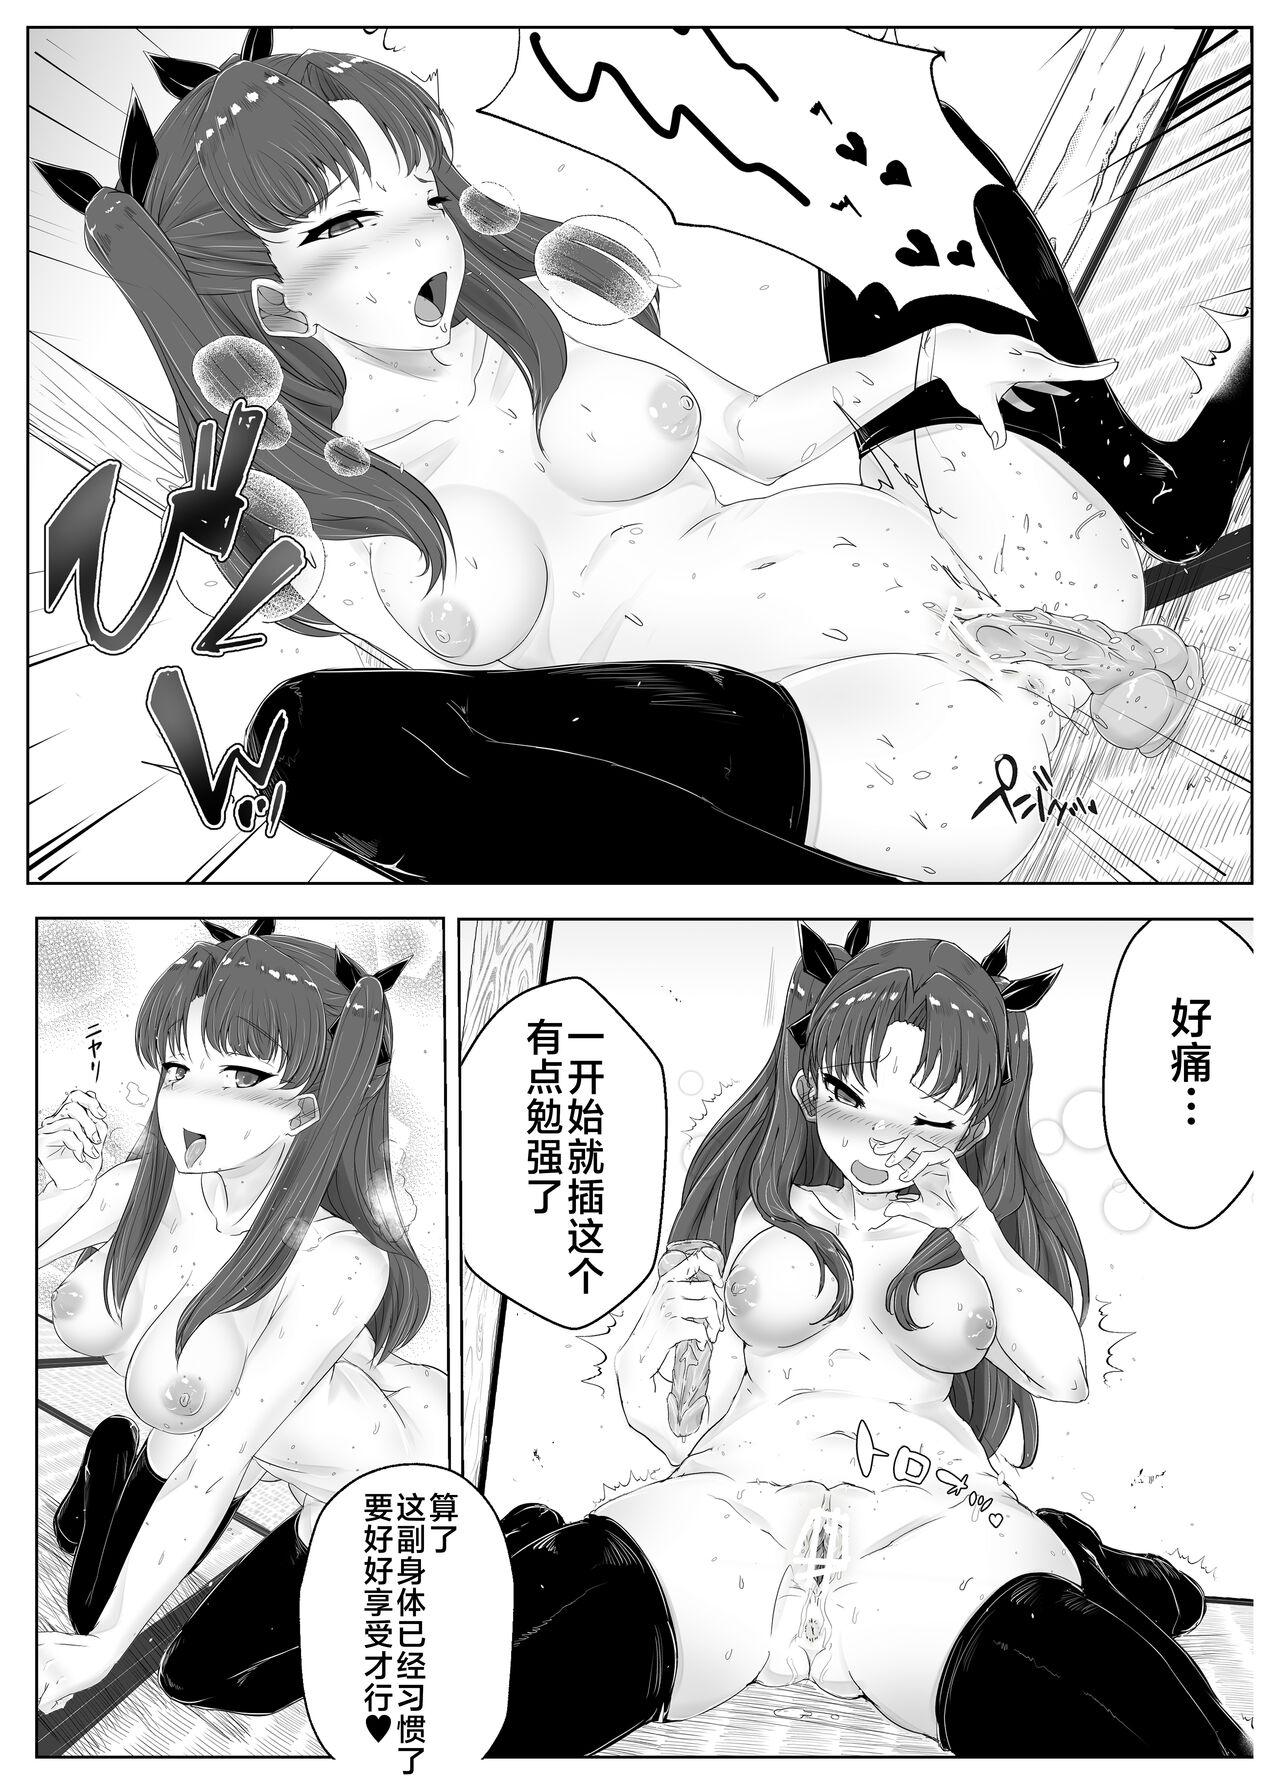 Transexual 遠坂凛乗り換え乗っ取り - Fate stay night Gay Skinny - Page 8